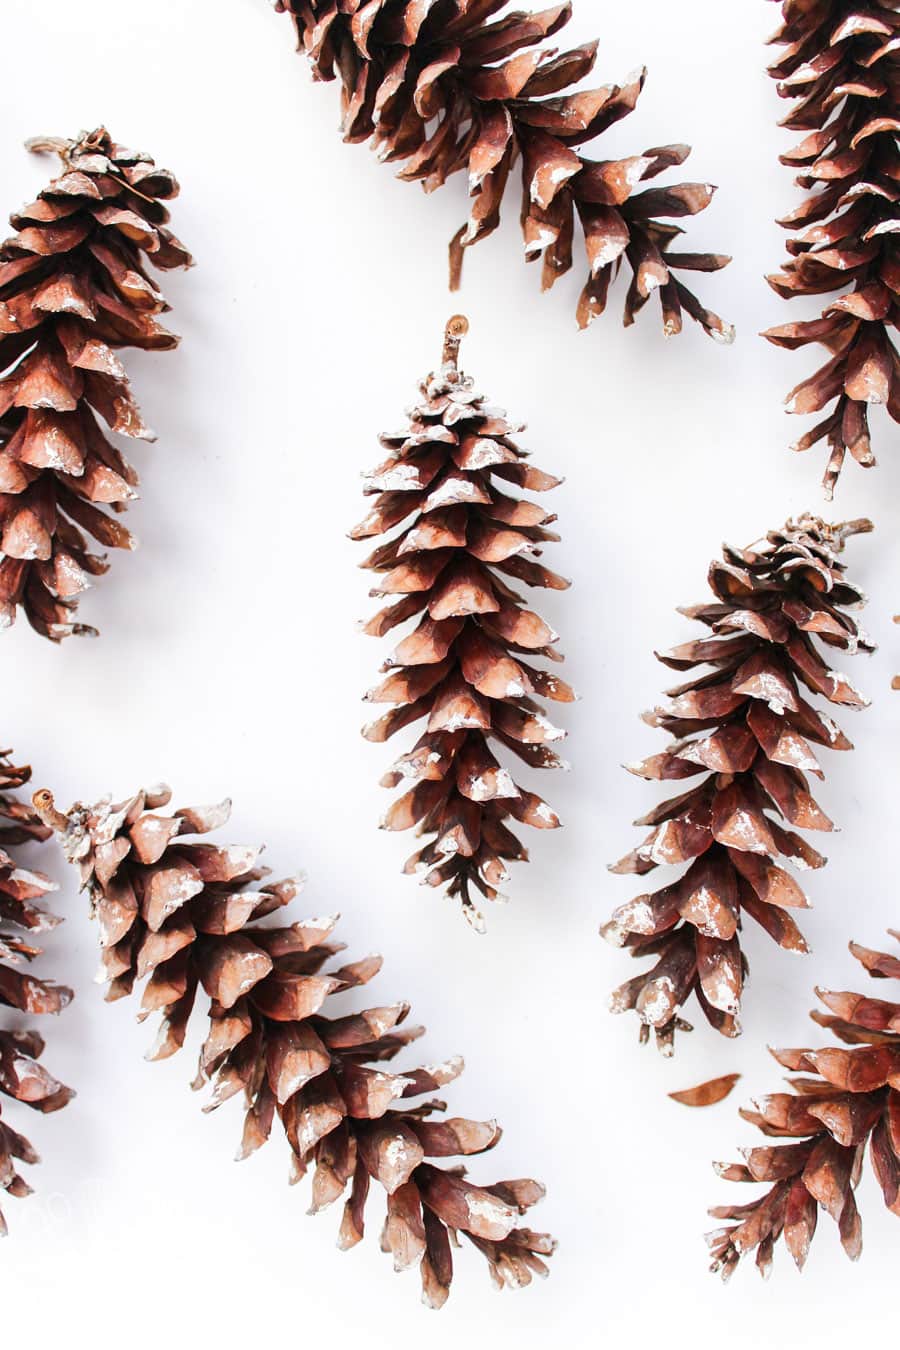 Dried and open pine cones on a white background